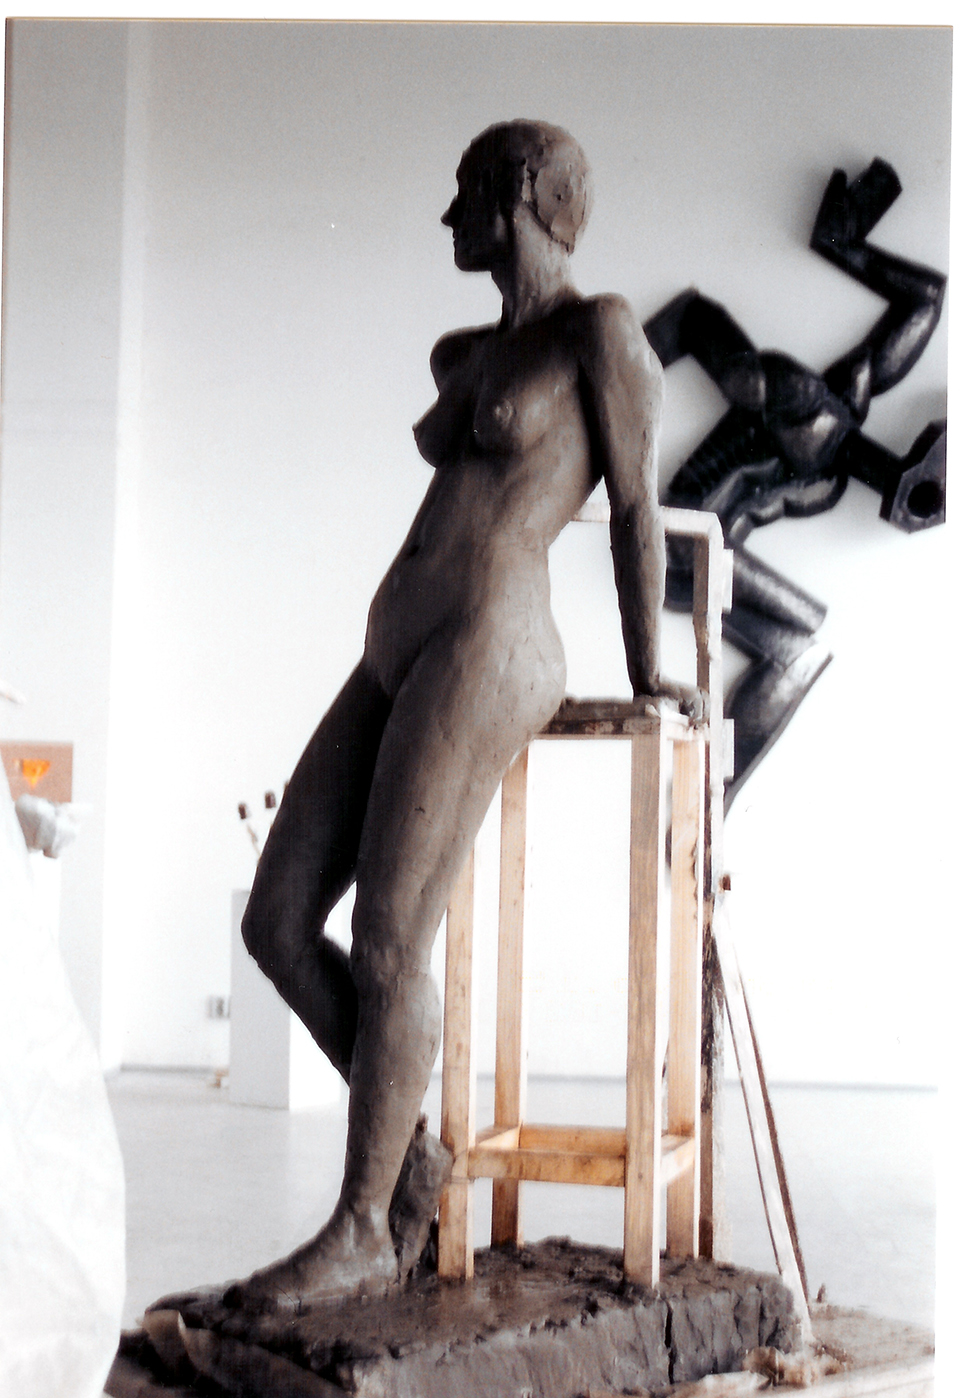 technique: clay dimensions: life size year: 2001